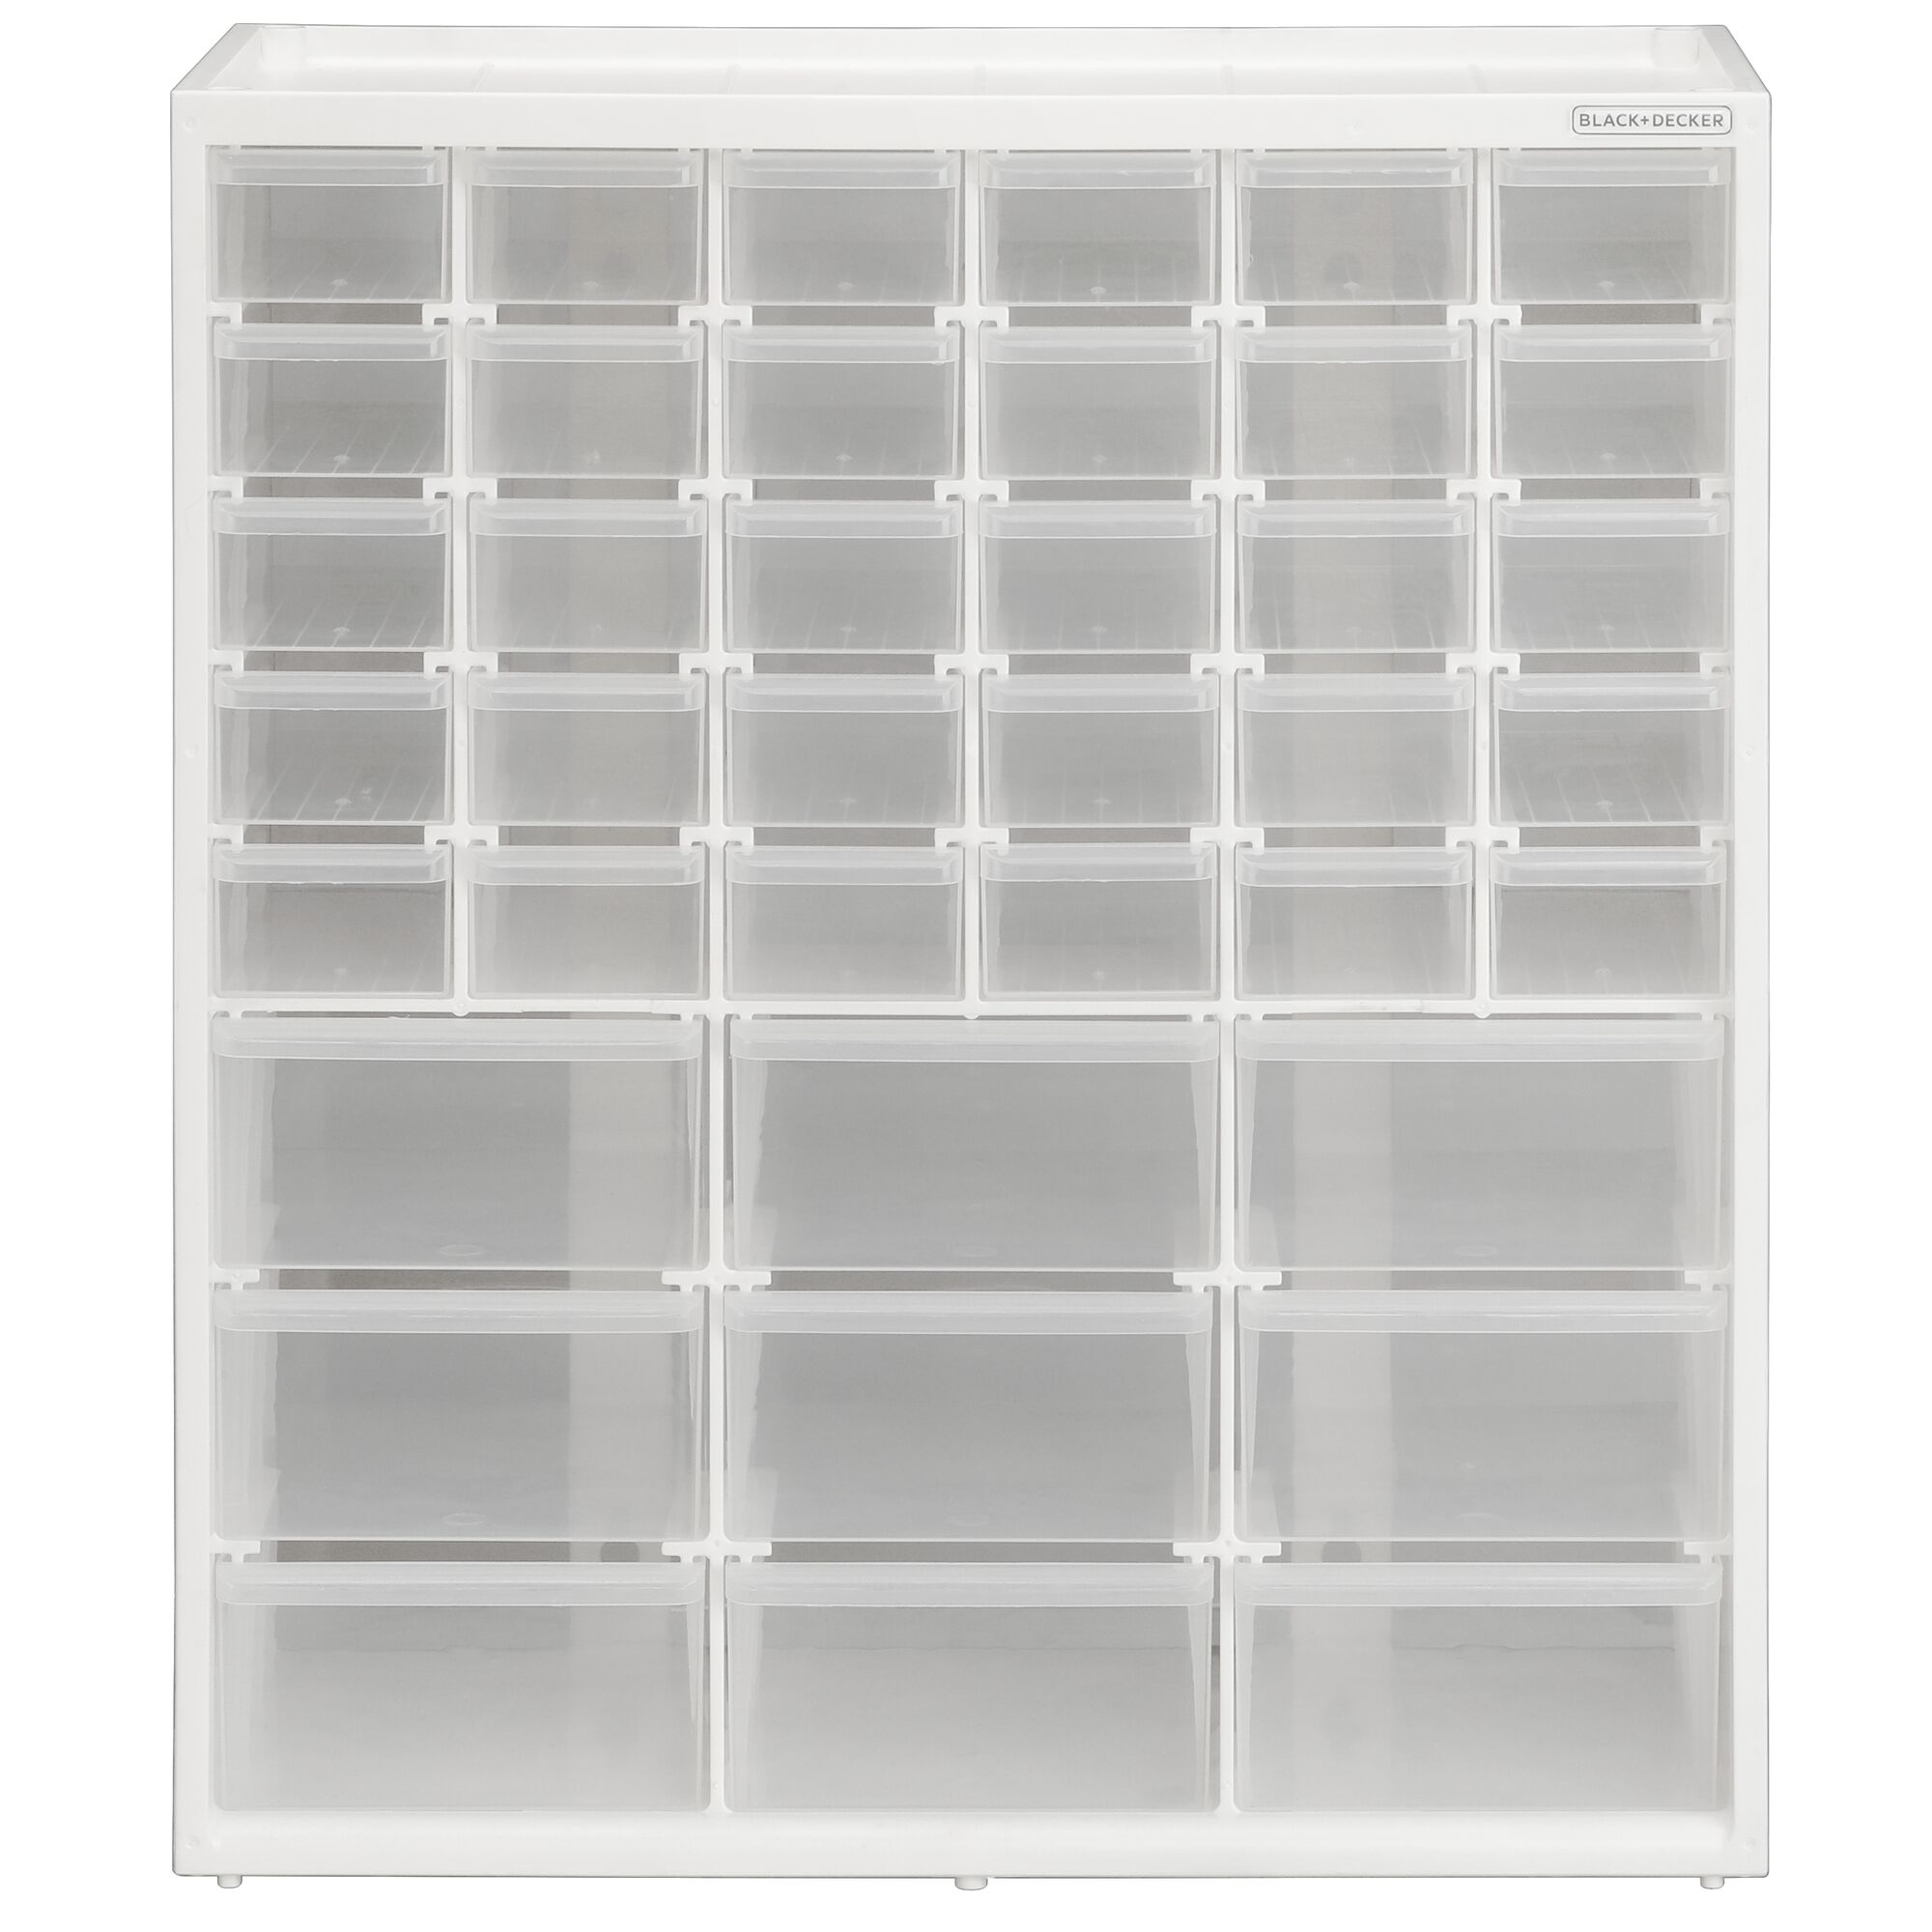 Front facing view of Black and decker Large & Small 39 Drawer Bin System with clear drawers